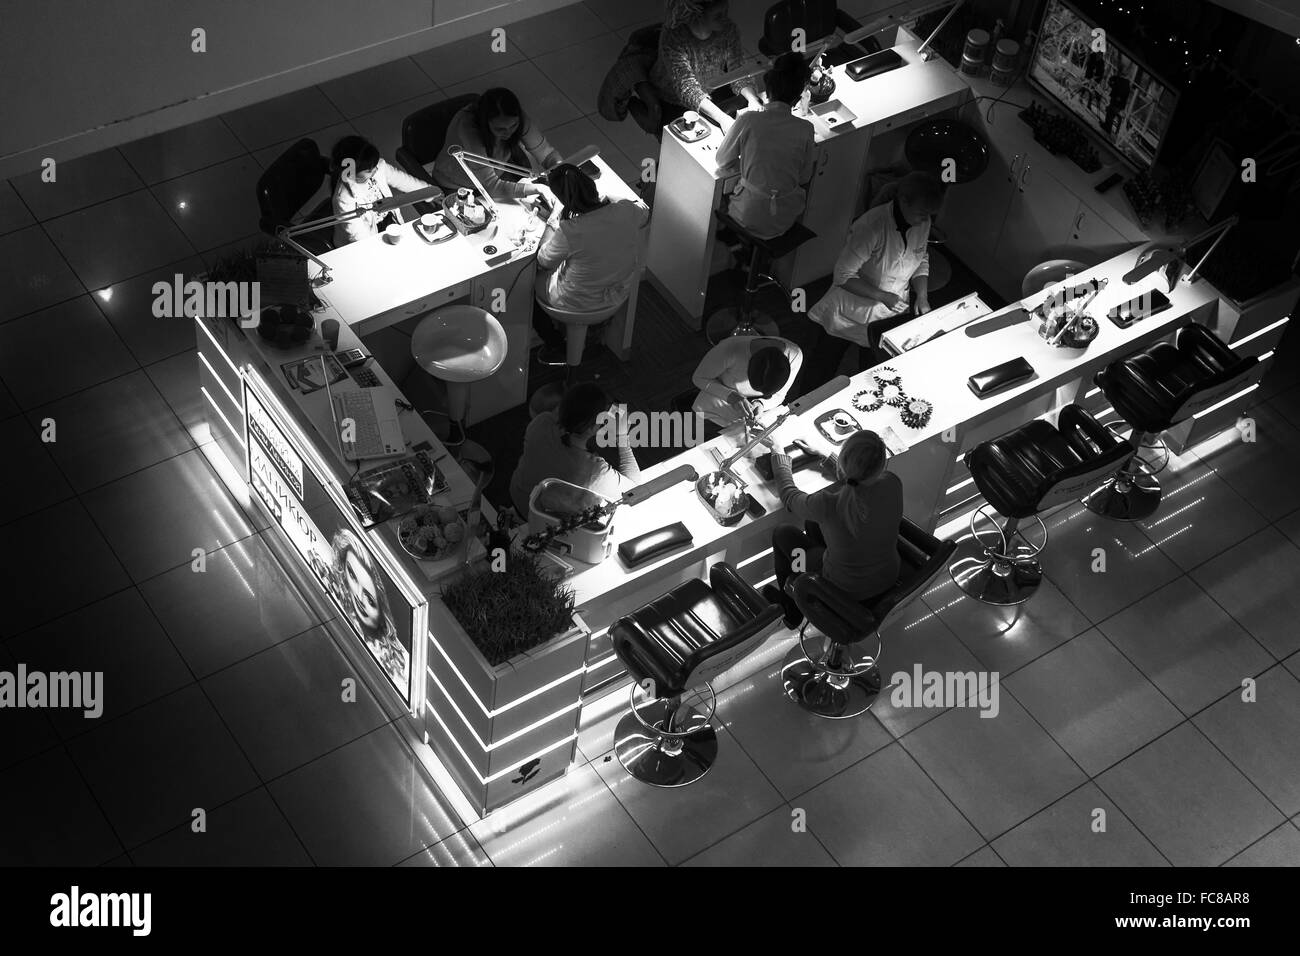 Modern nail bar taken from a high vantage point looking down at the women having their nails done in black and white Stock Photo